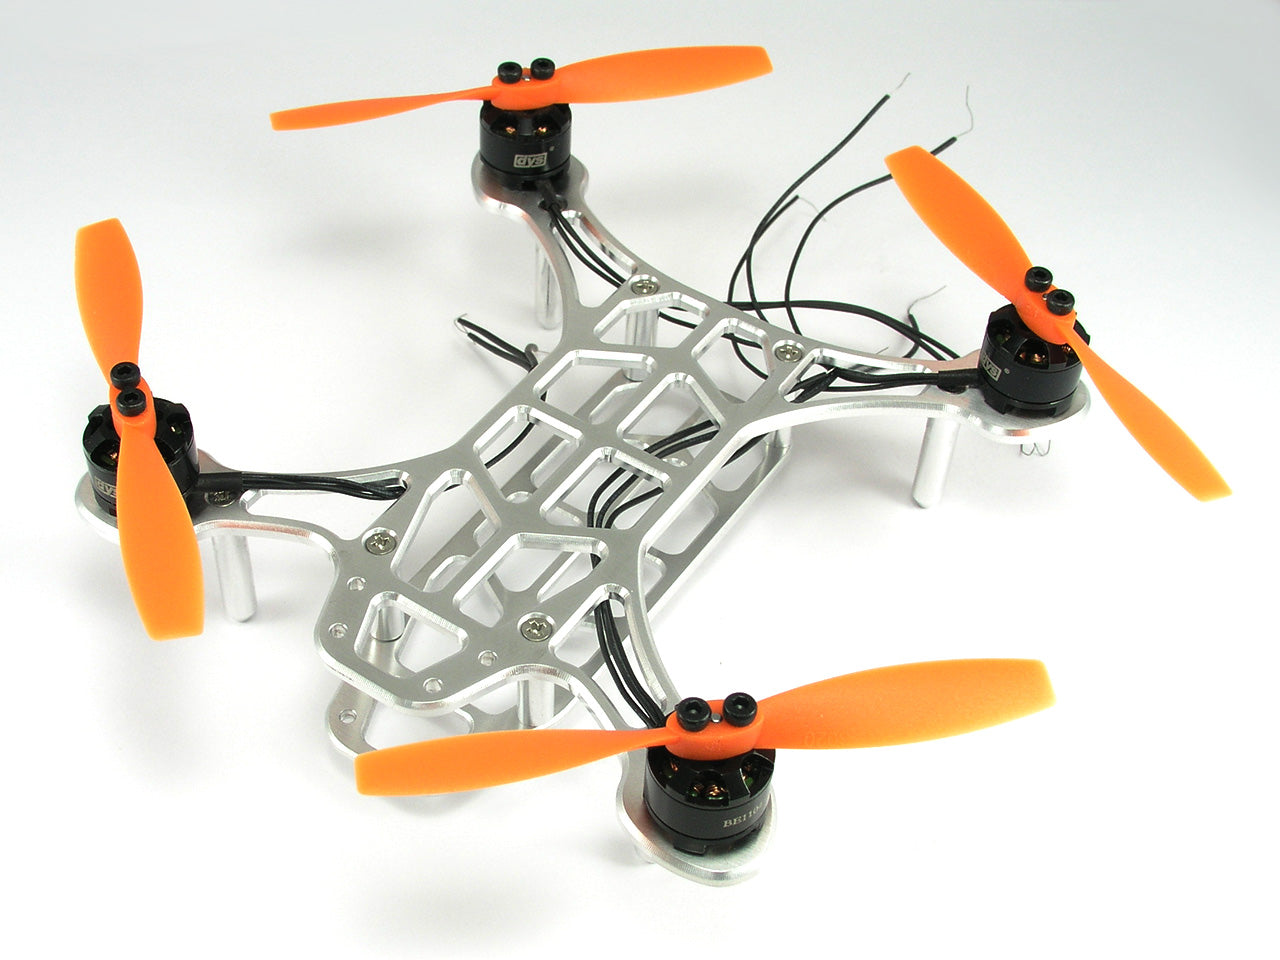 Surface 120 FPV Racing Frame